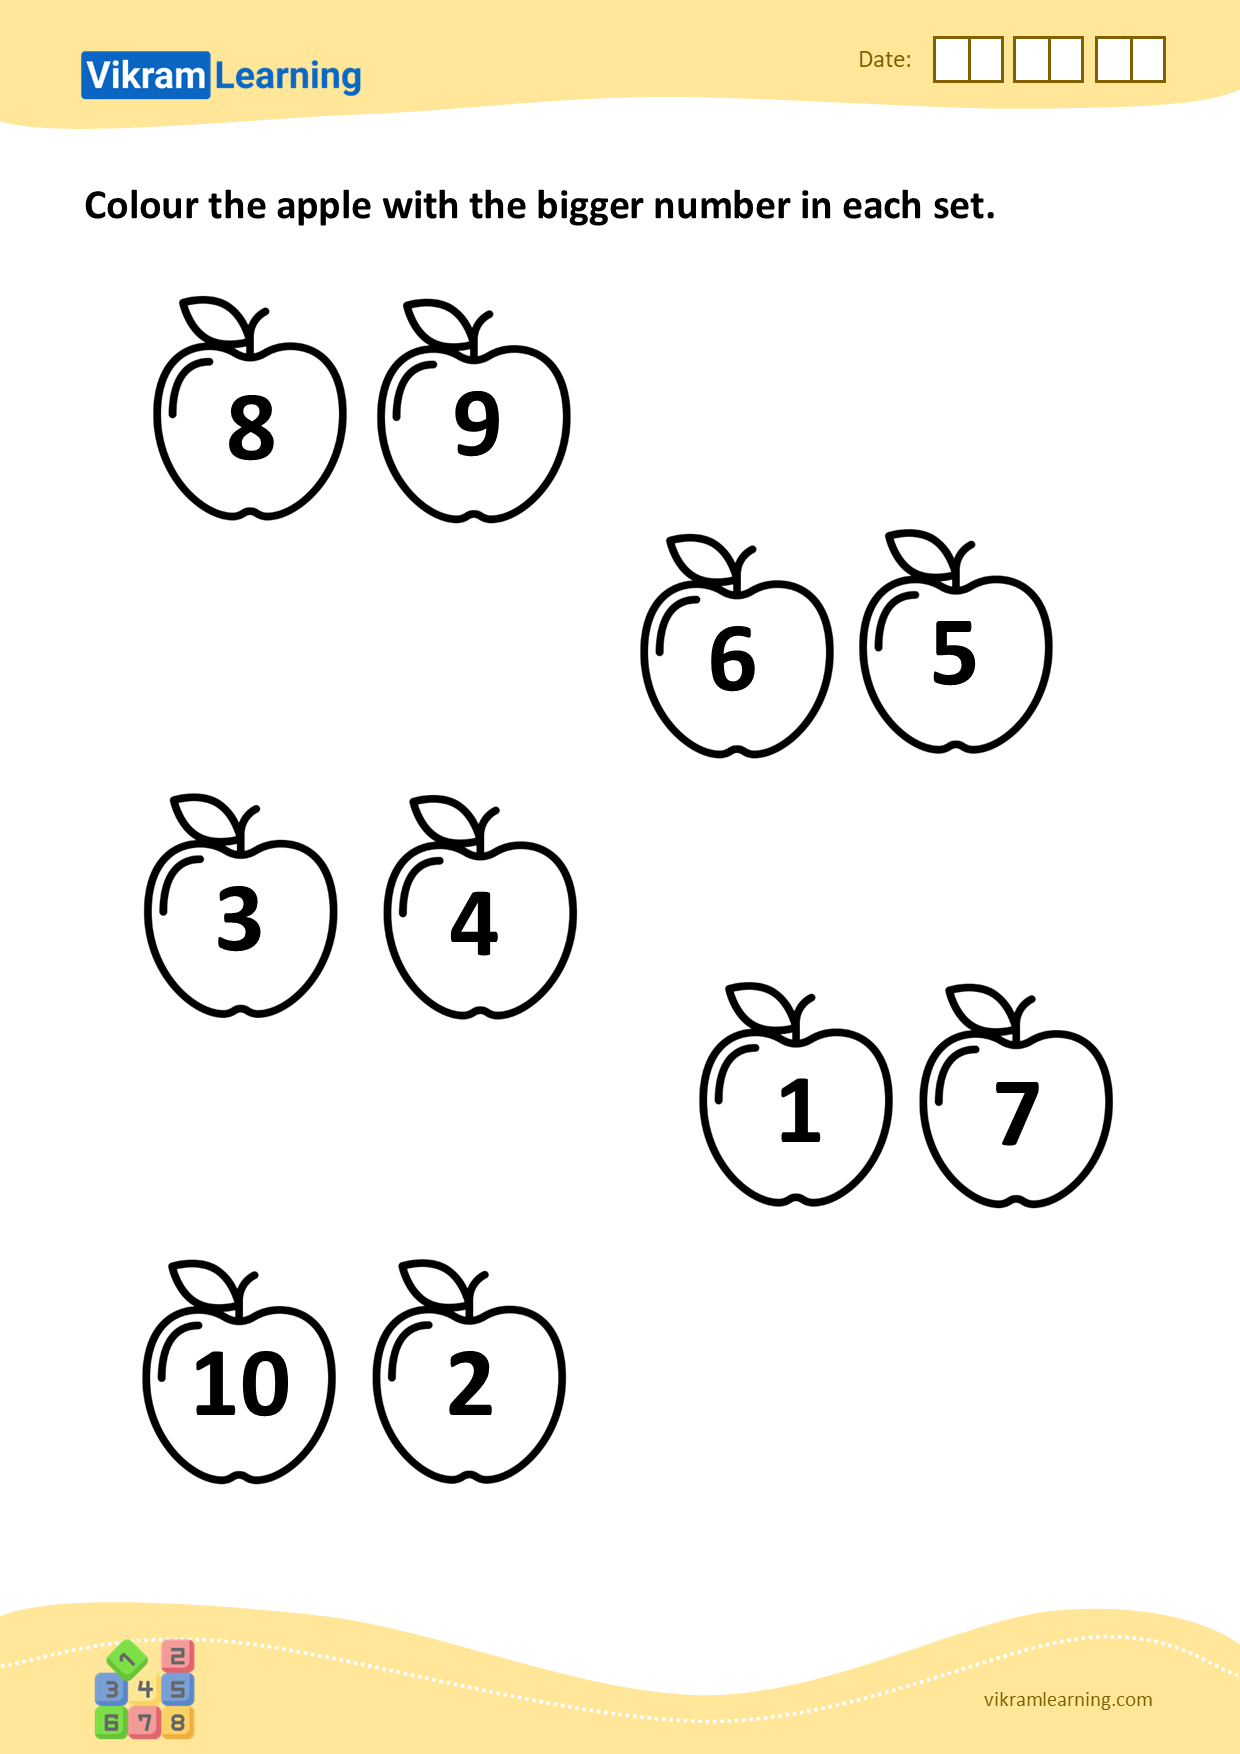 Download colour the apple with the bigger number in each set worksheets